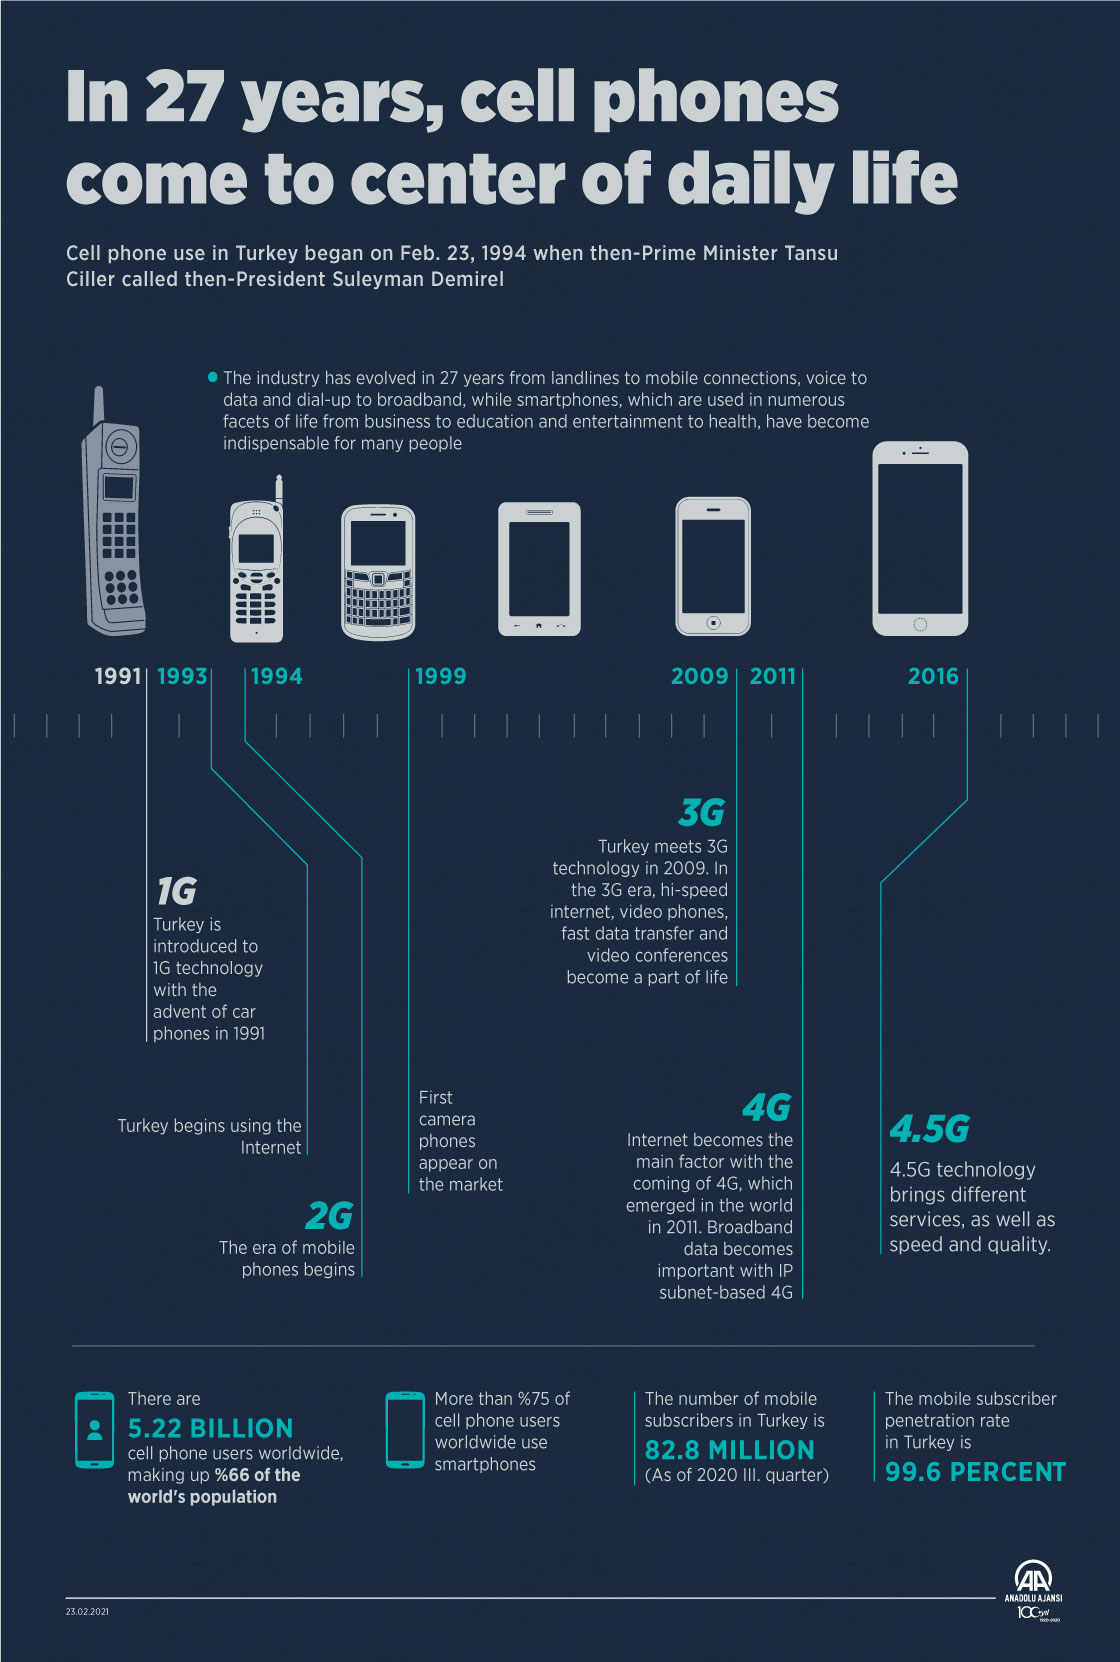 In 27 years, cell phones come to center of daily life